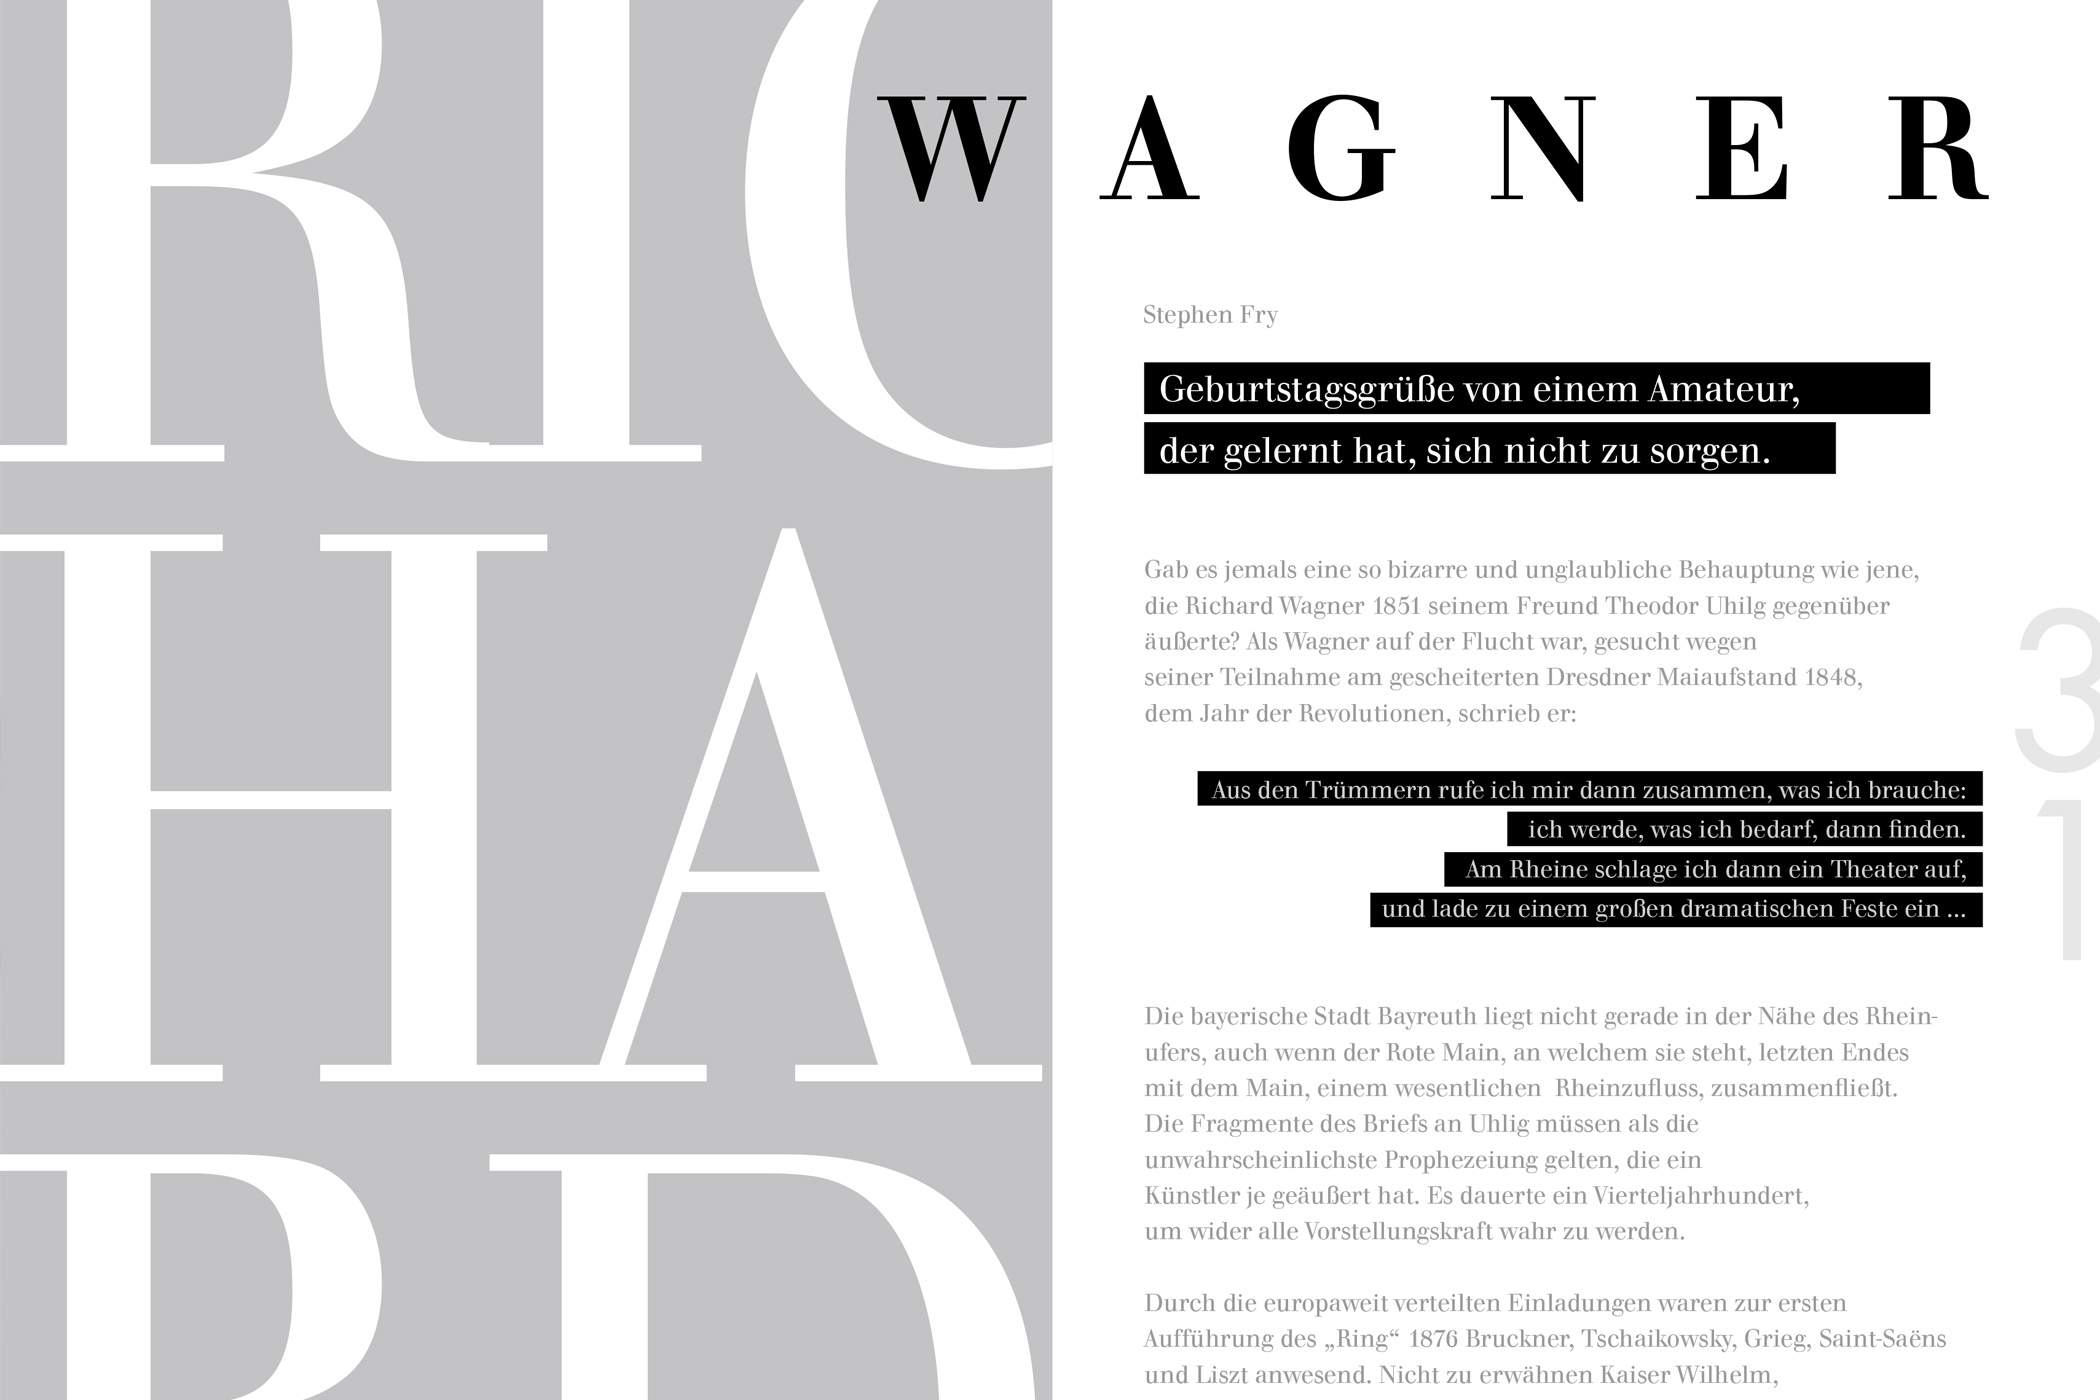 Book Editorial Richard Wagner 